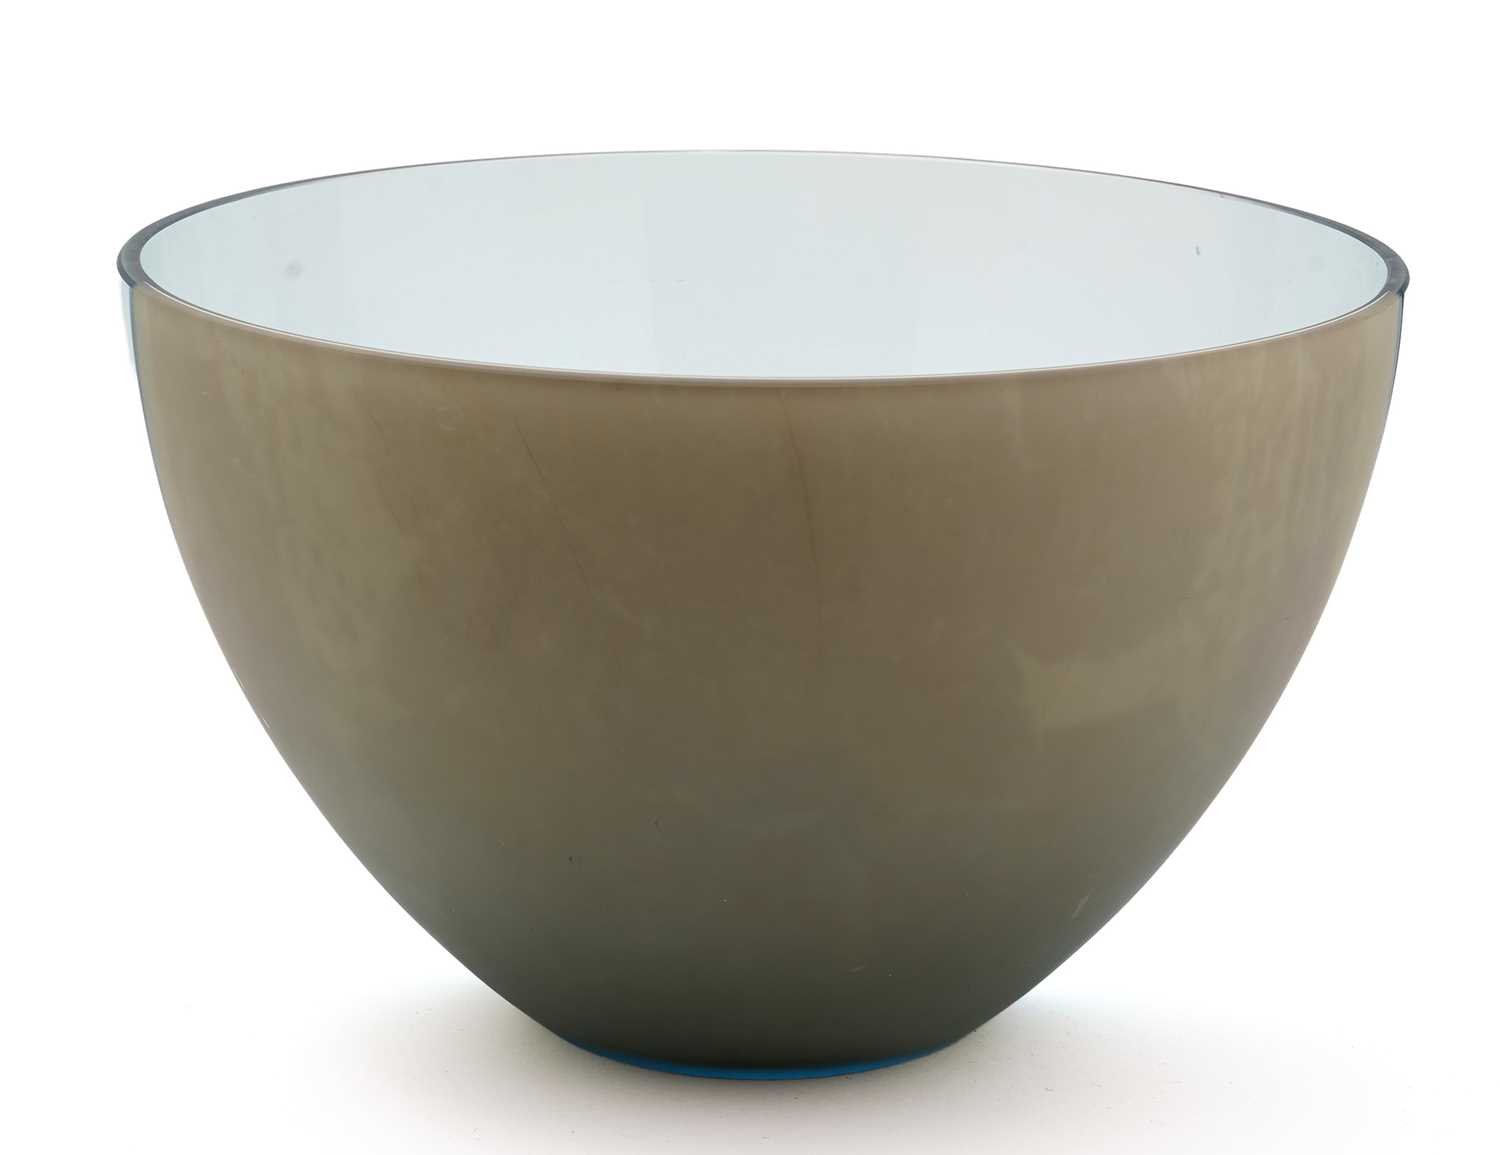 Venini 'Le Sabbie' overlay glass bowl by Claudio Silvestrin - Image 6 of 7